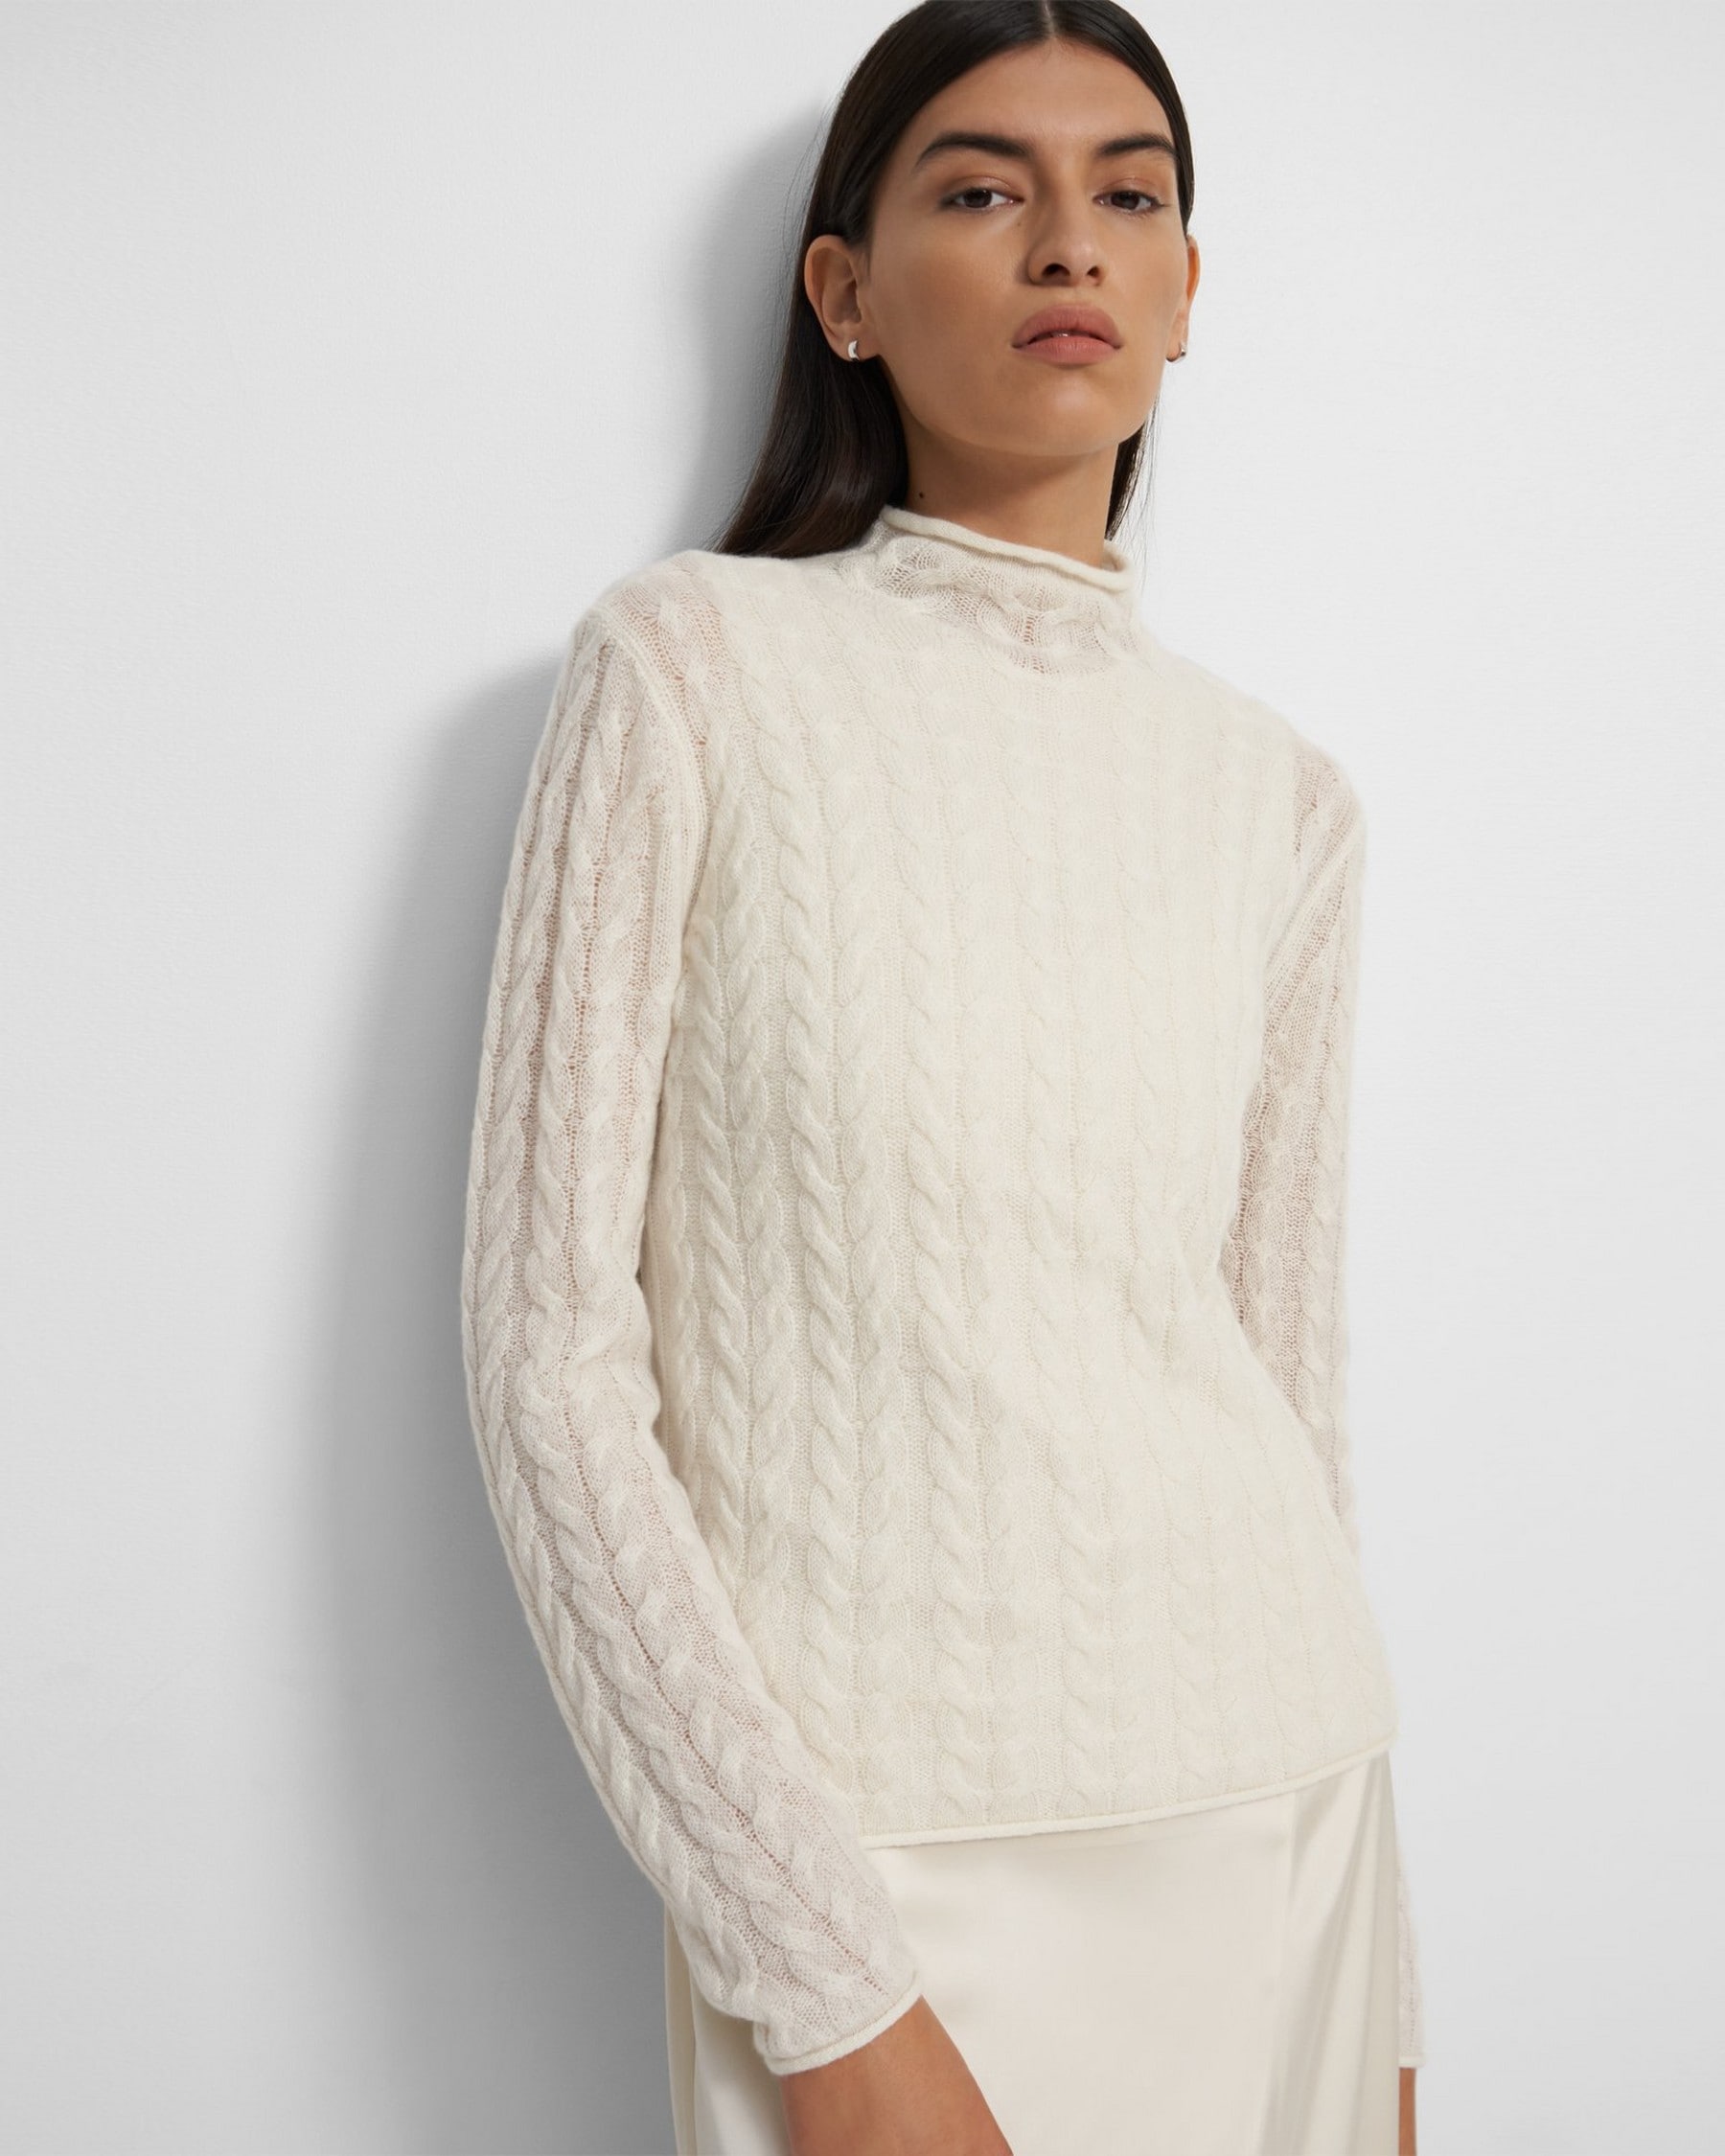 Woman 100% Cashmere Sweaters Knitted Pullovers Jumper Female Mock Neck Blouse